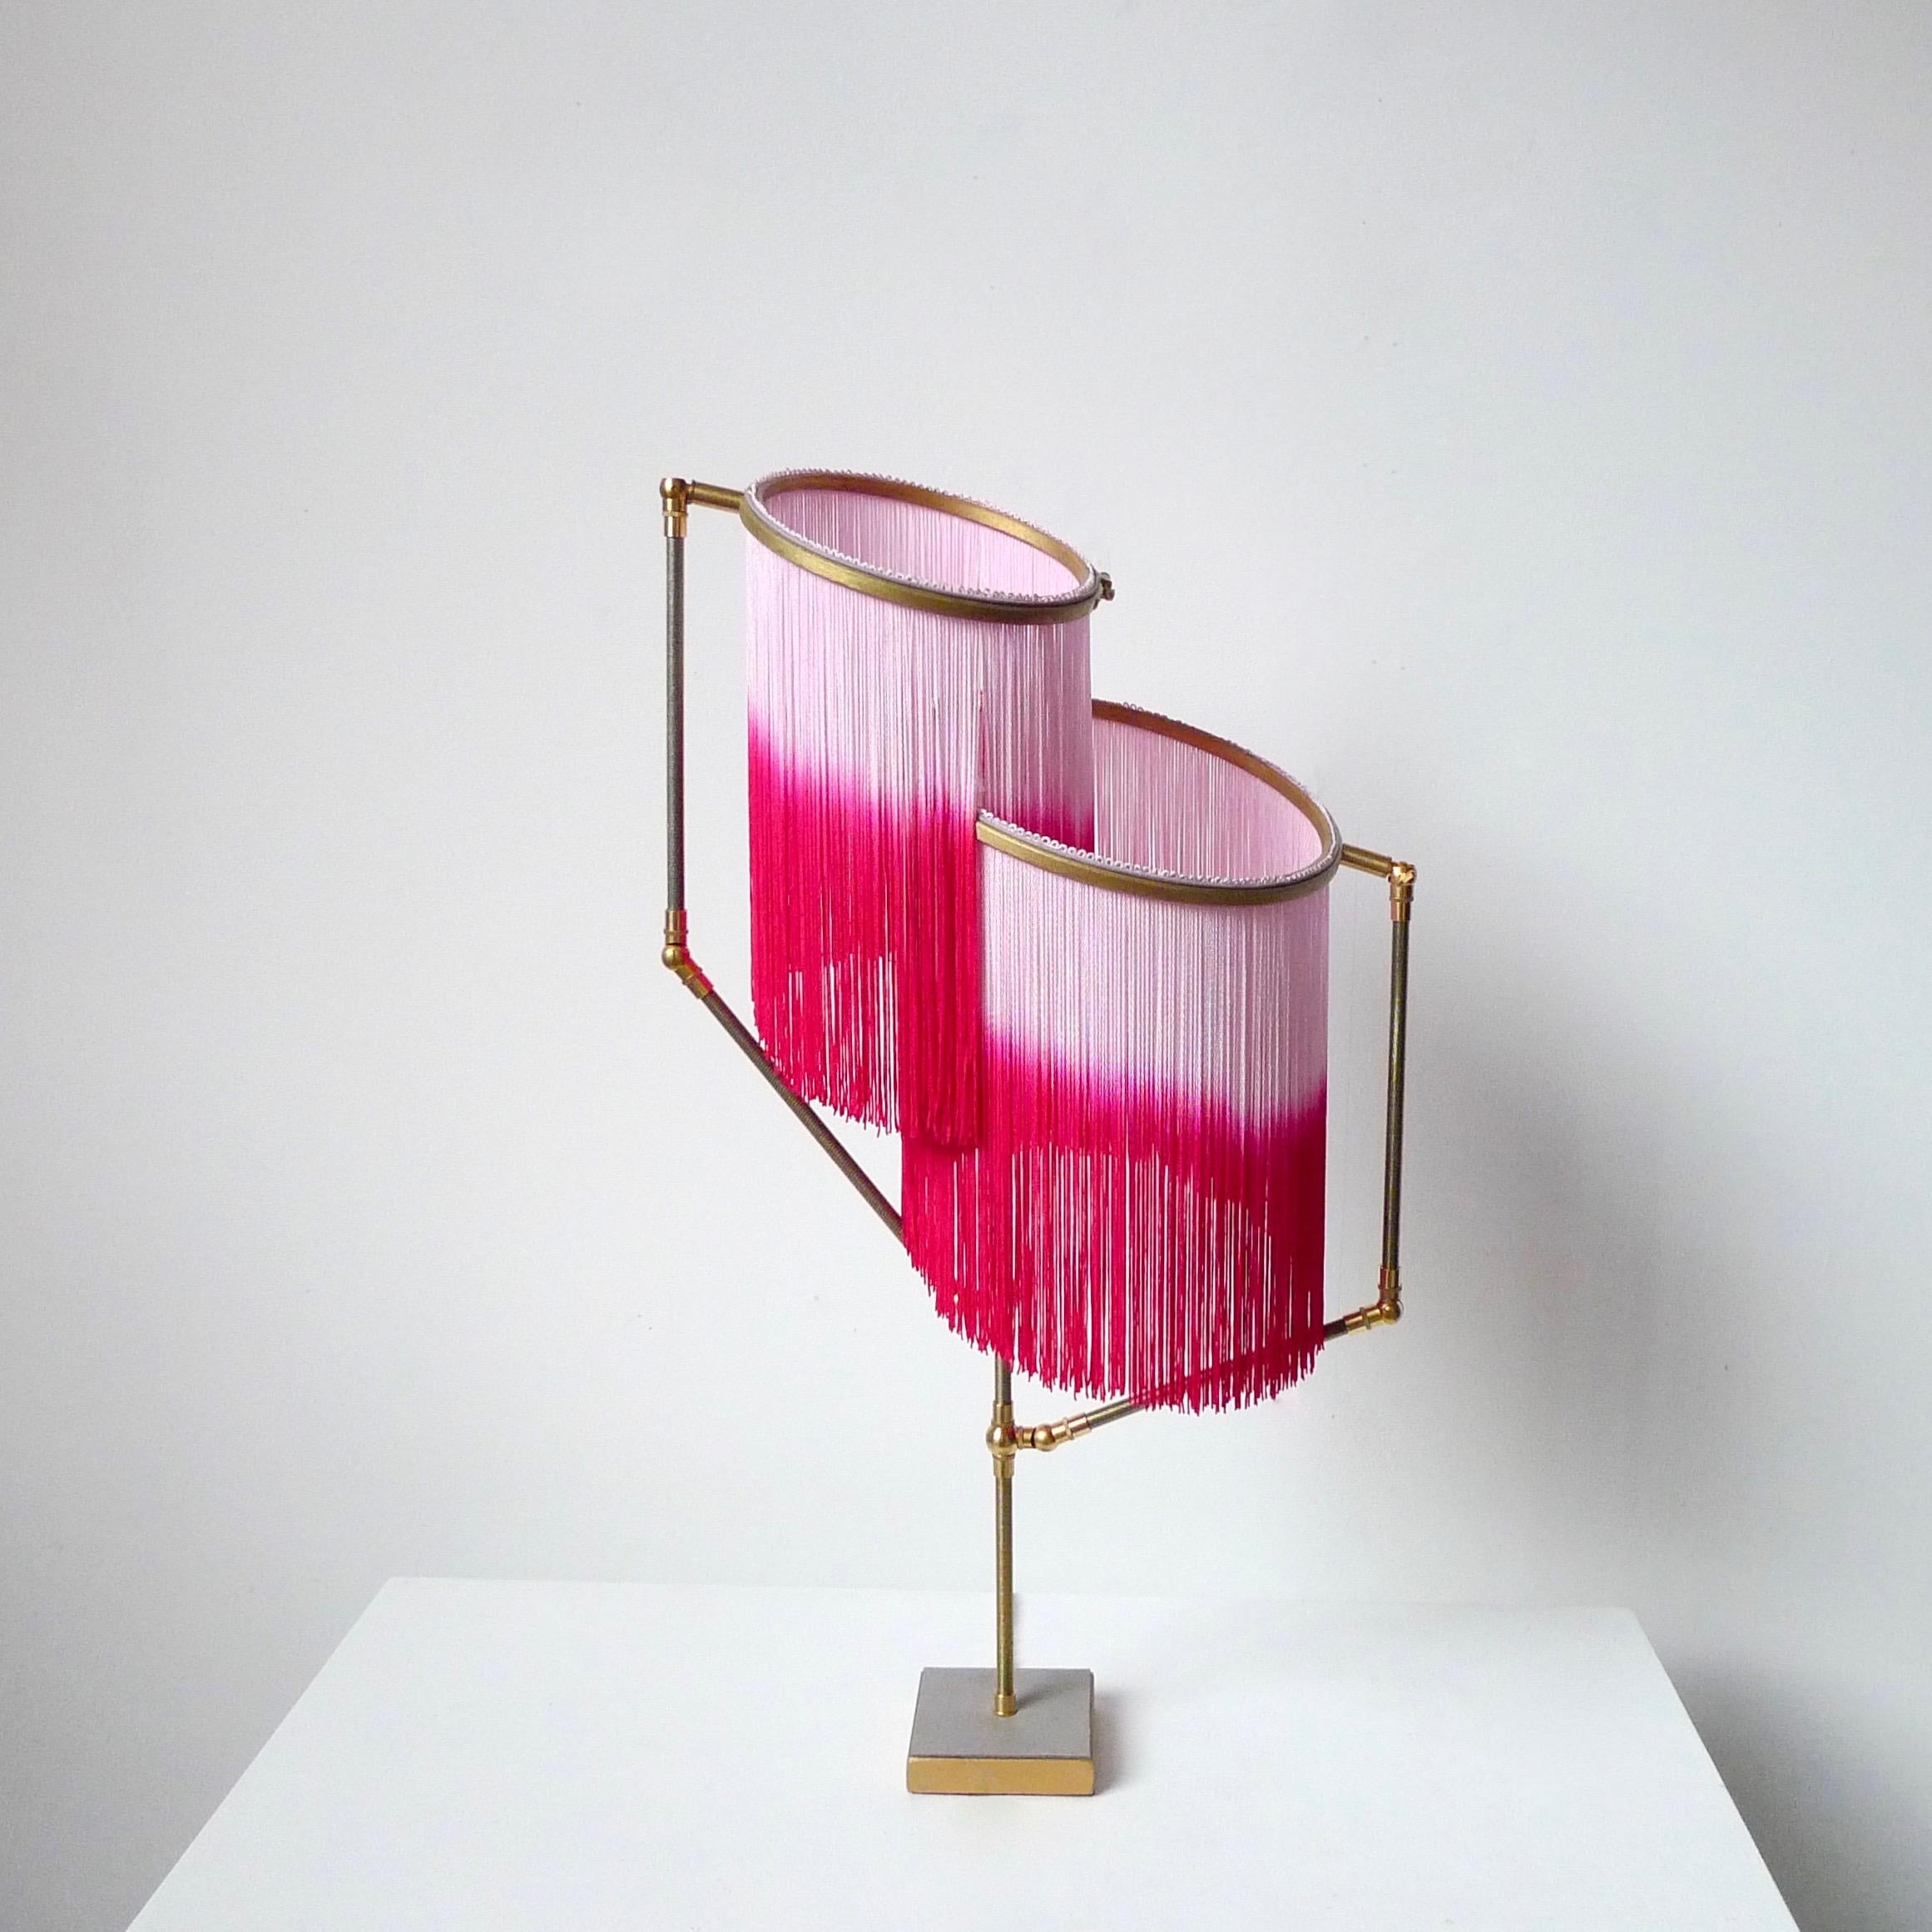 Pink charme table lamp, Sander Bottinga

Dimensions: H 73 x W 38 x D 25 cm
Handmade in brass, leather, wood and dip dyed colored Fringes in viscose.
The movable arms makes it possible to move the circles with fringes in different positions.
So